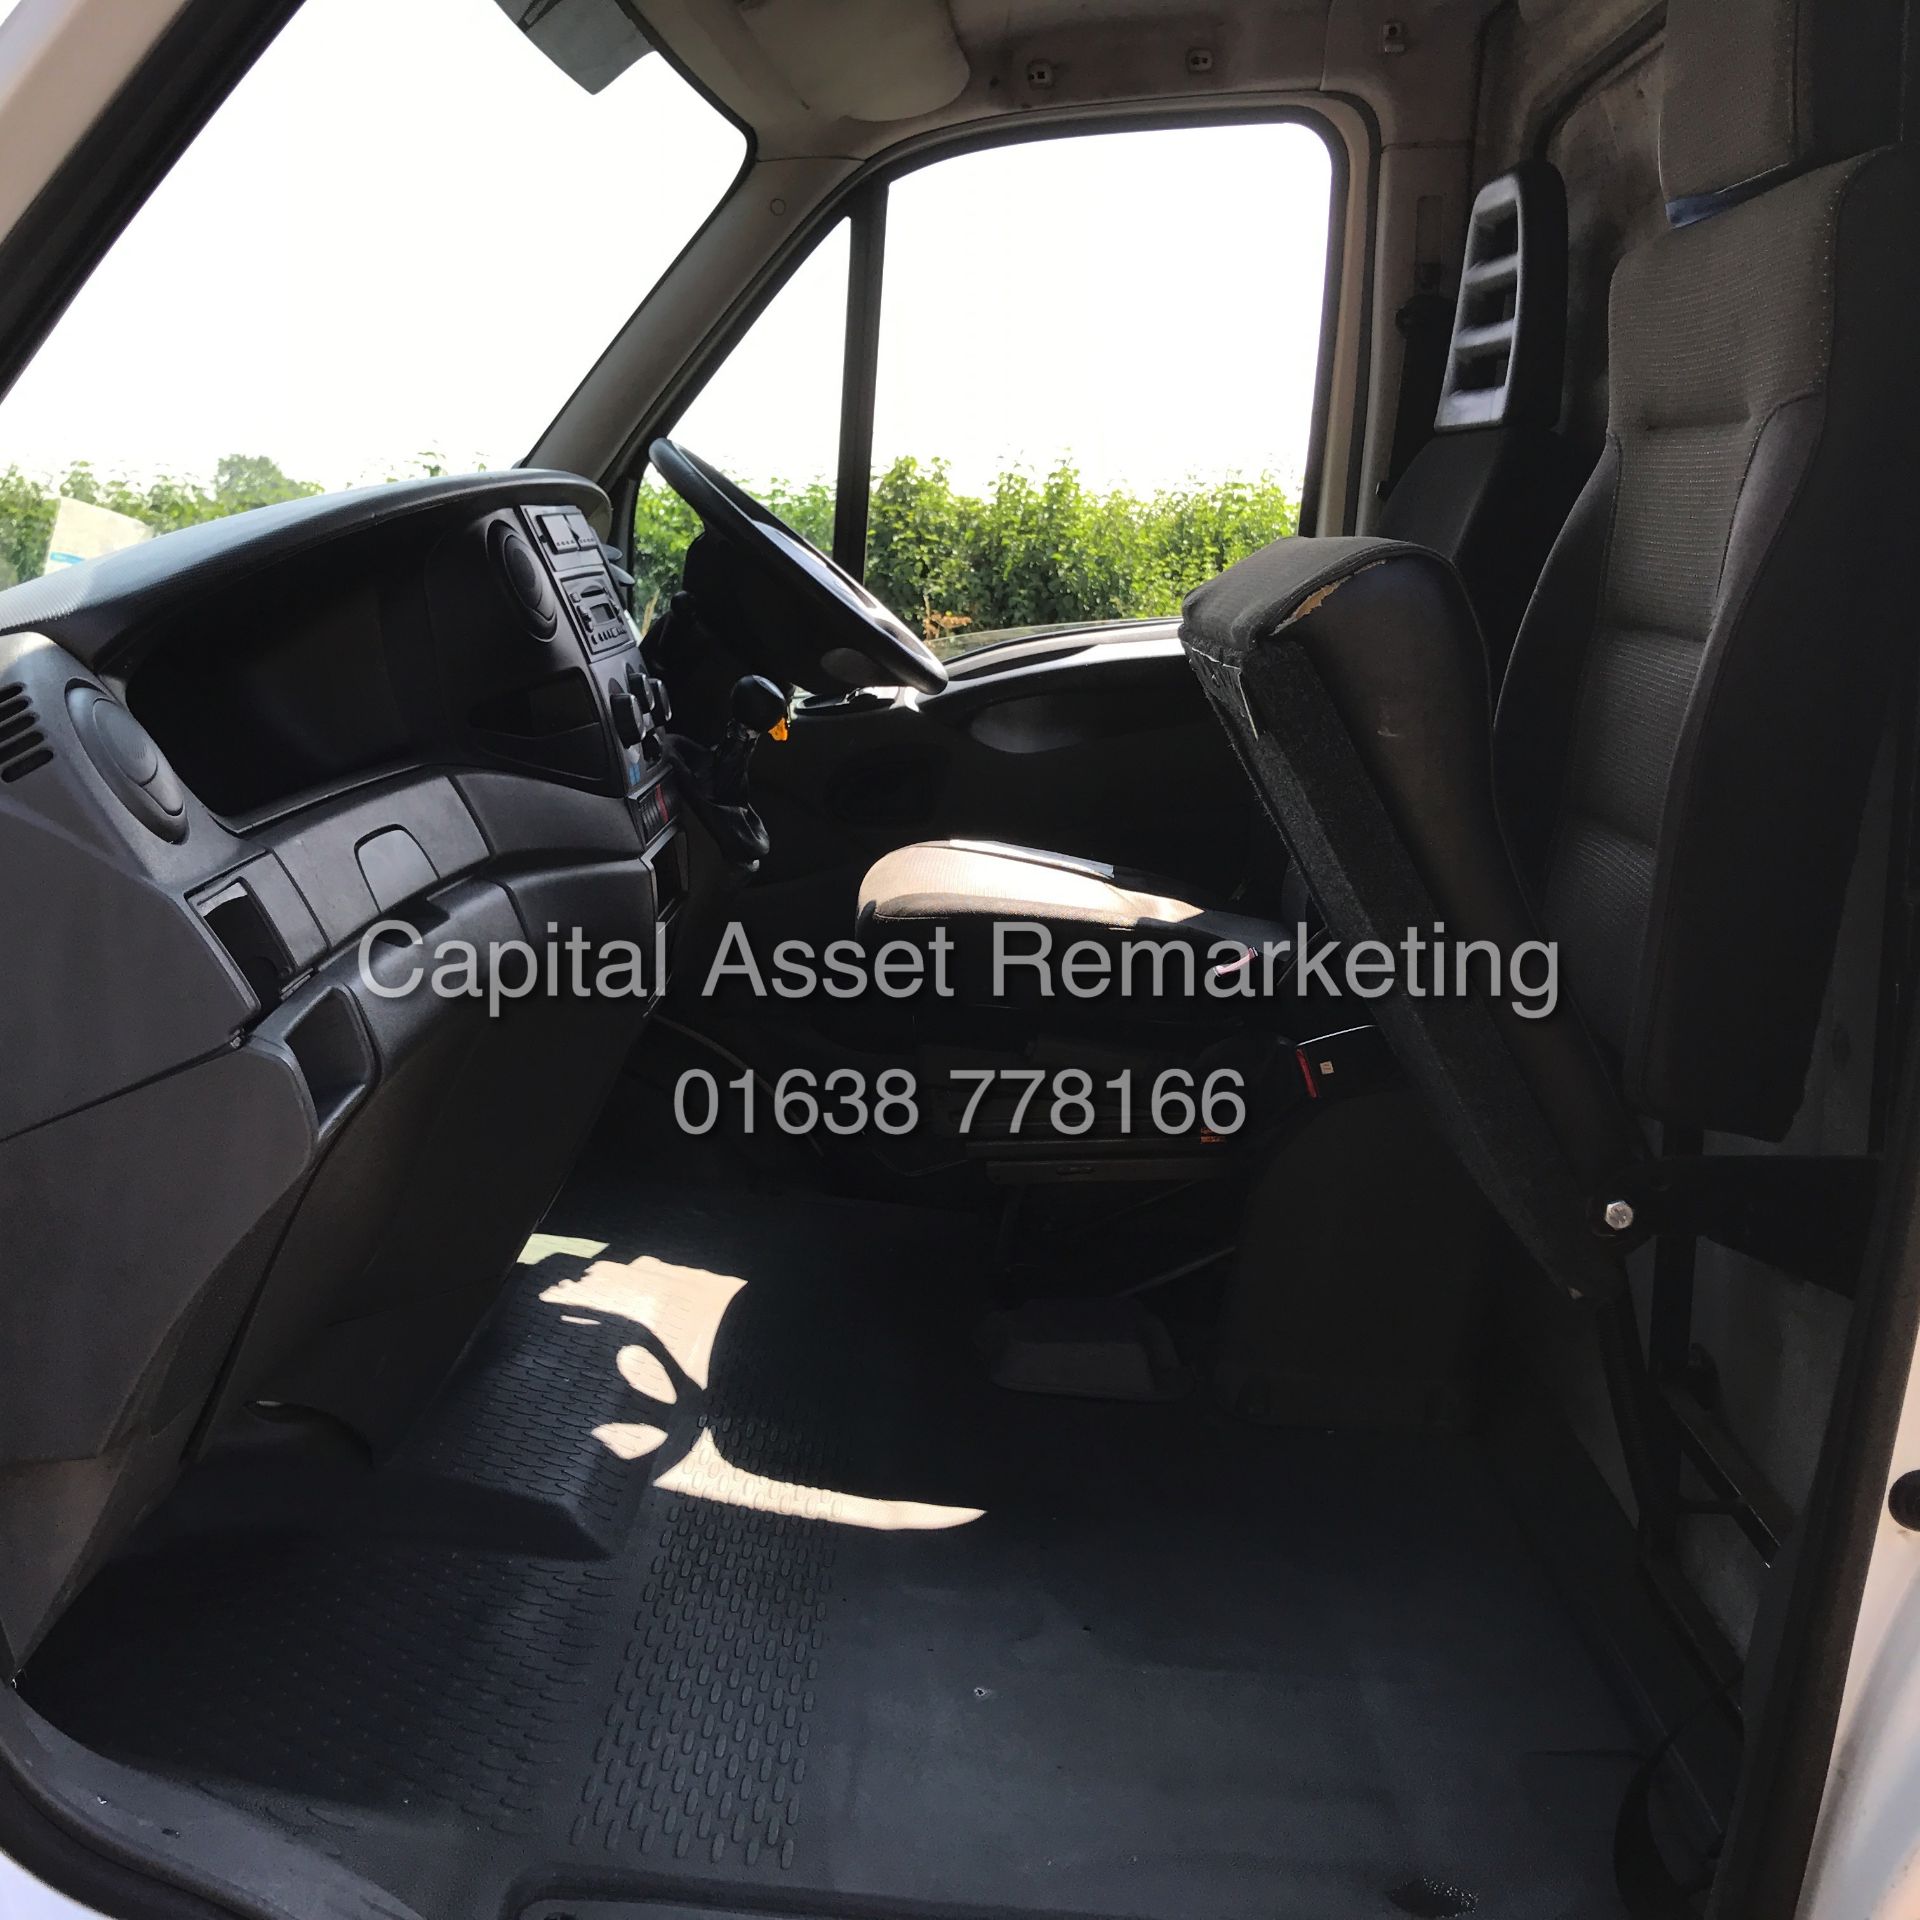 IVECO DAILY 35S11 (2013 - 13 REG) LWB / CHASSIS CAB **IDEAL TRANSPORTER CONVERSION** 1 OWNER - Image 6 of 8